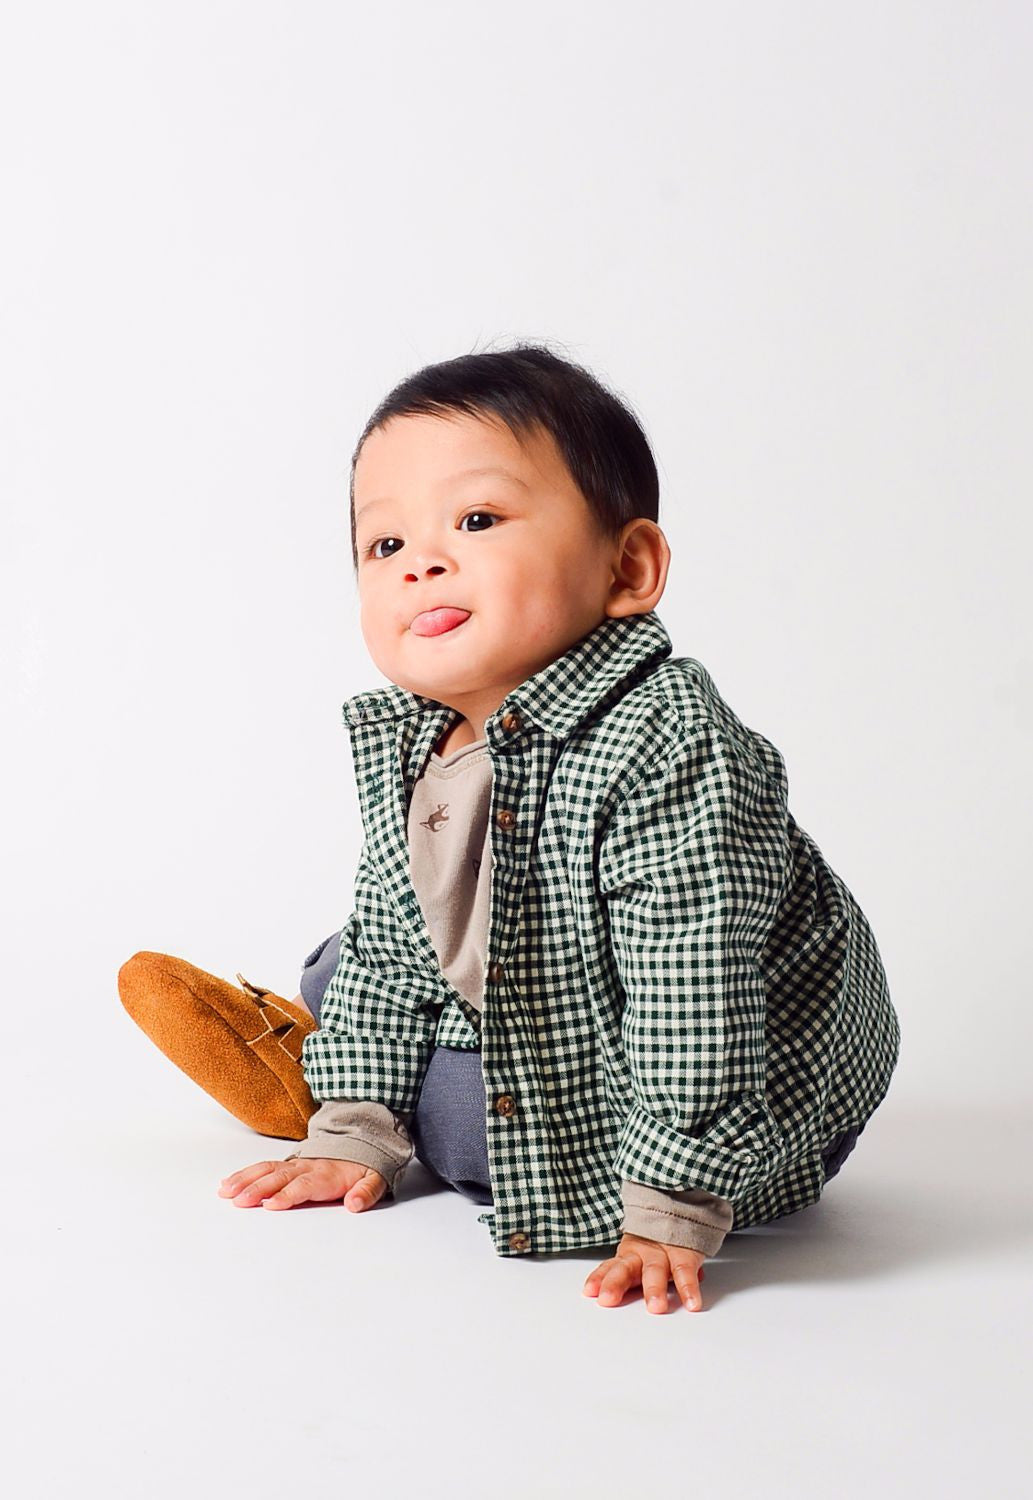 Stylish Baby Boy - Posters by Sina | Buy Posters, Frames, Canvas ...